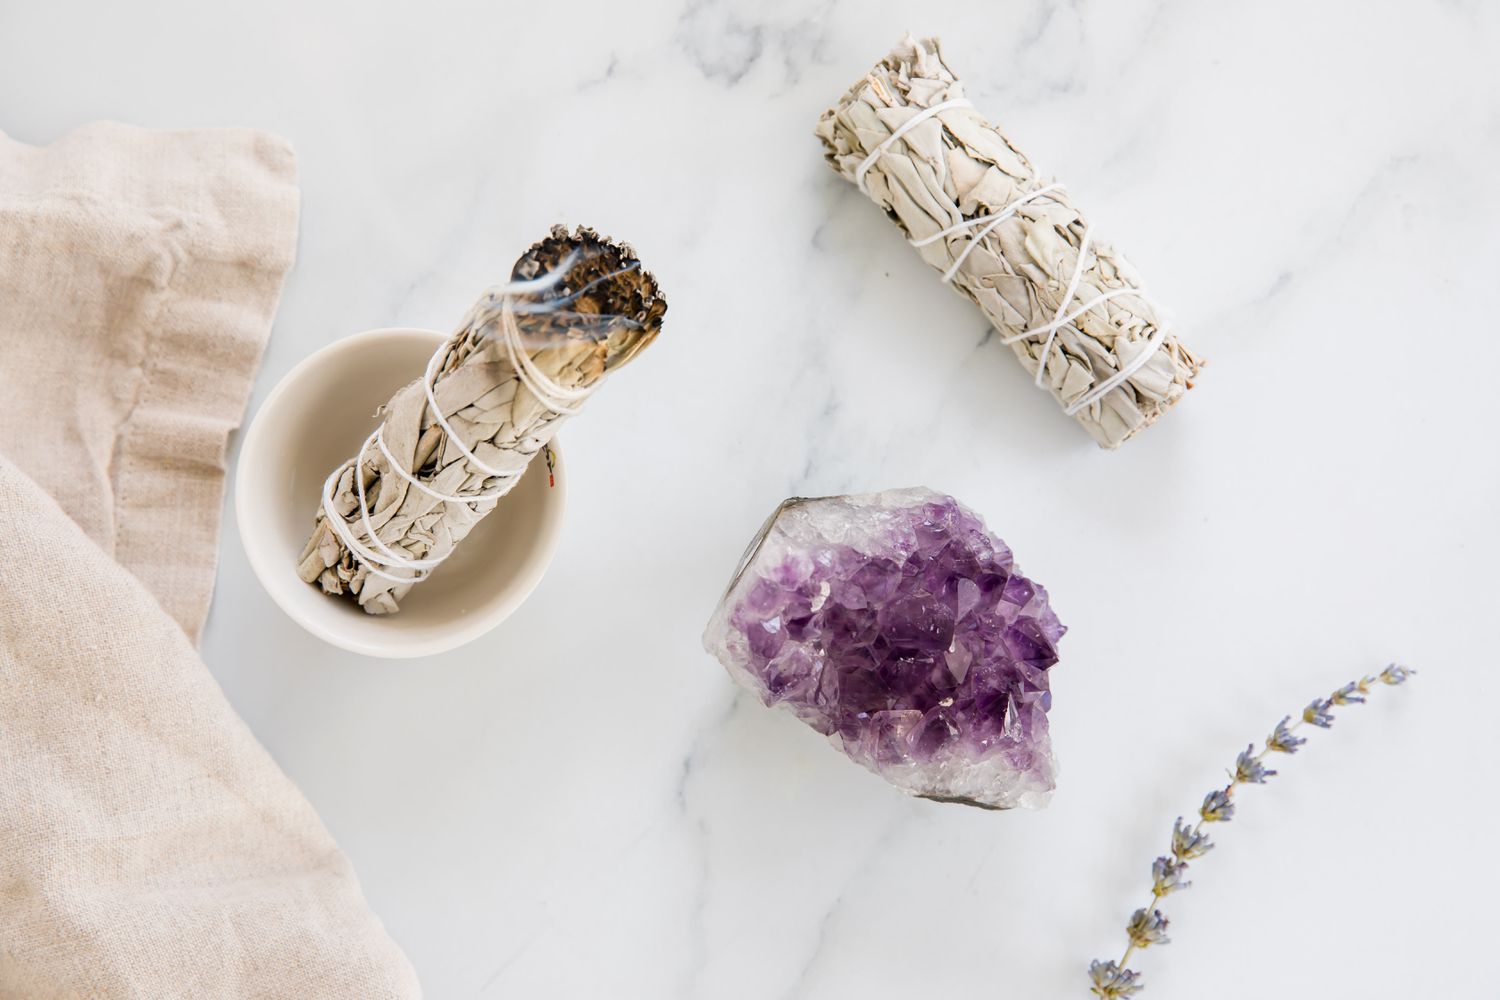 cleansing crystals by smudging